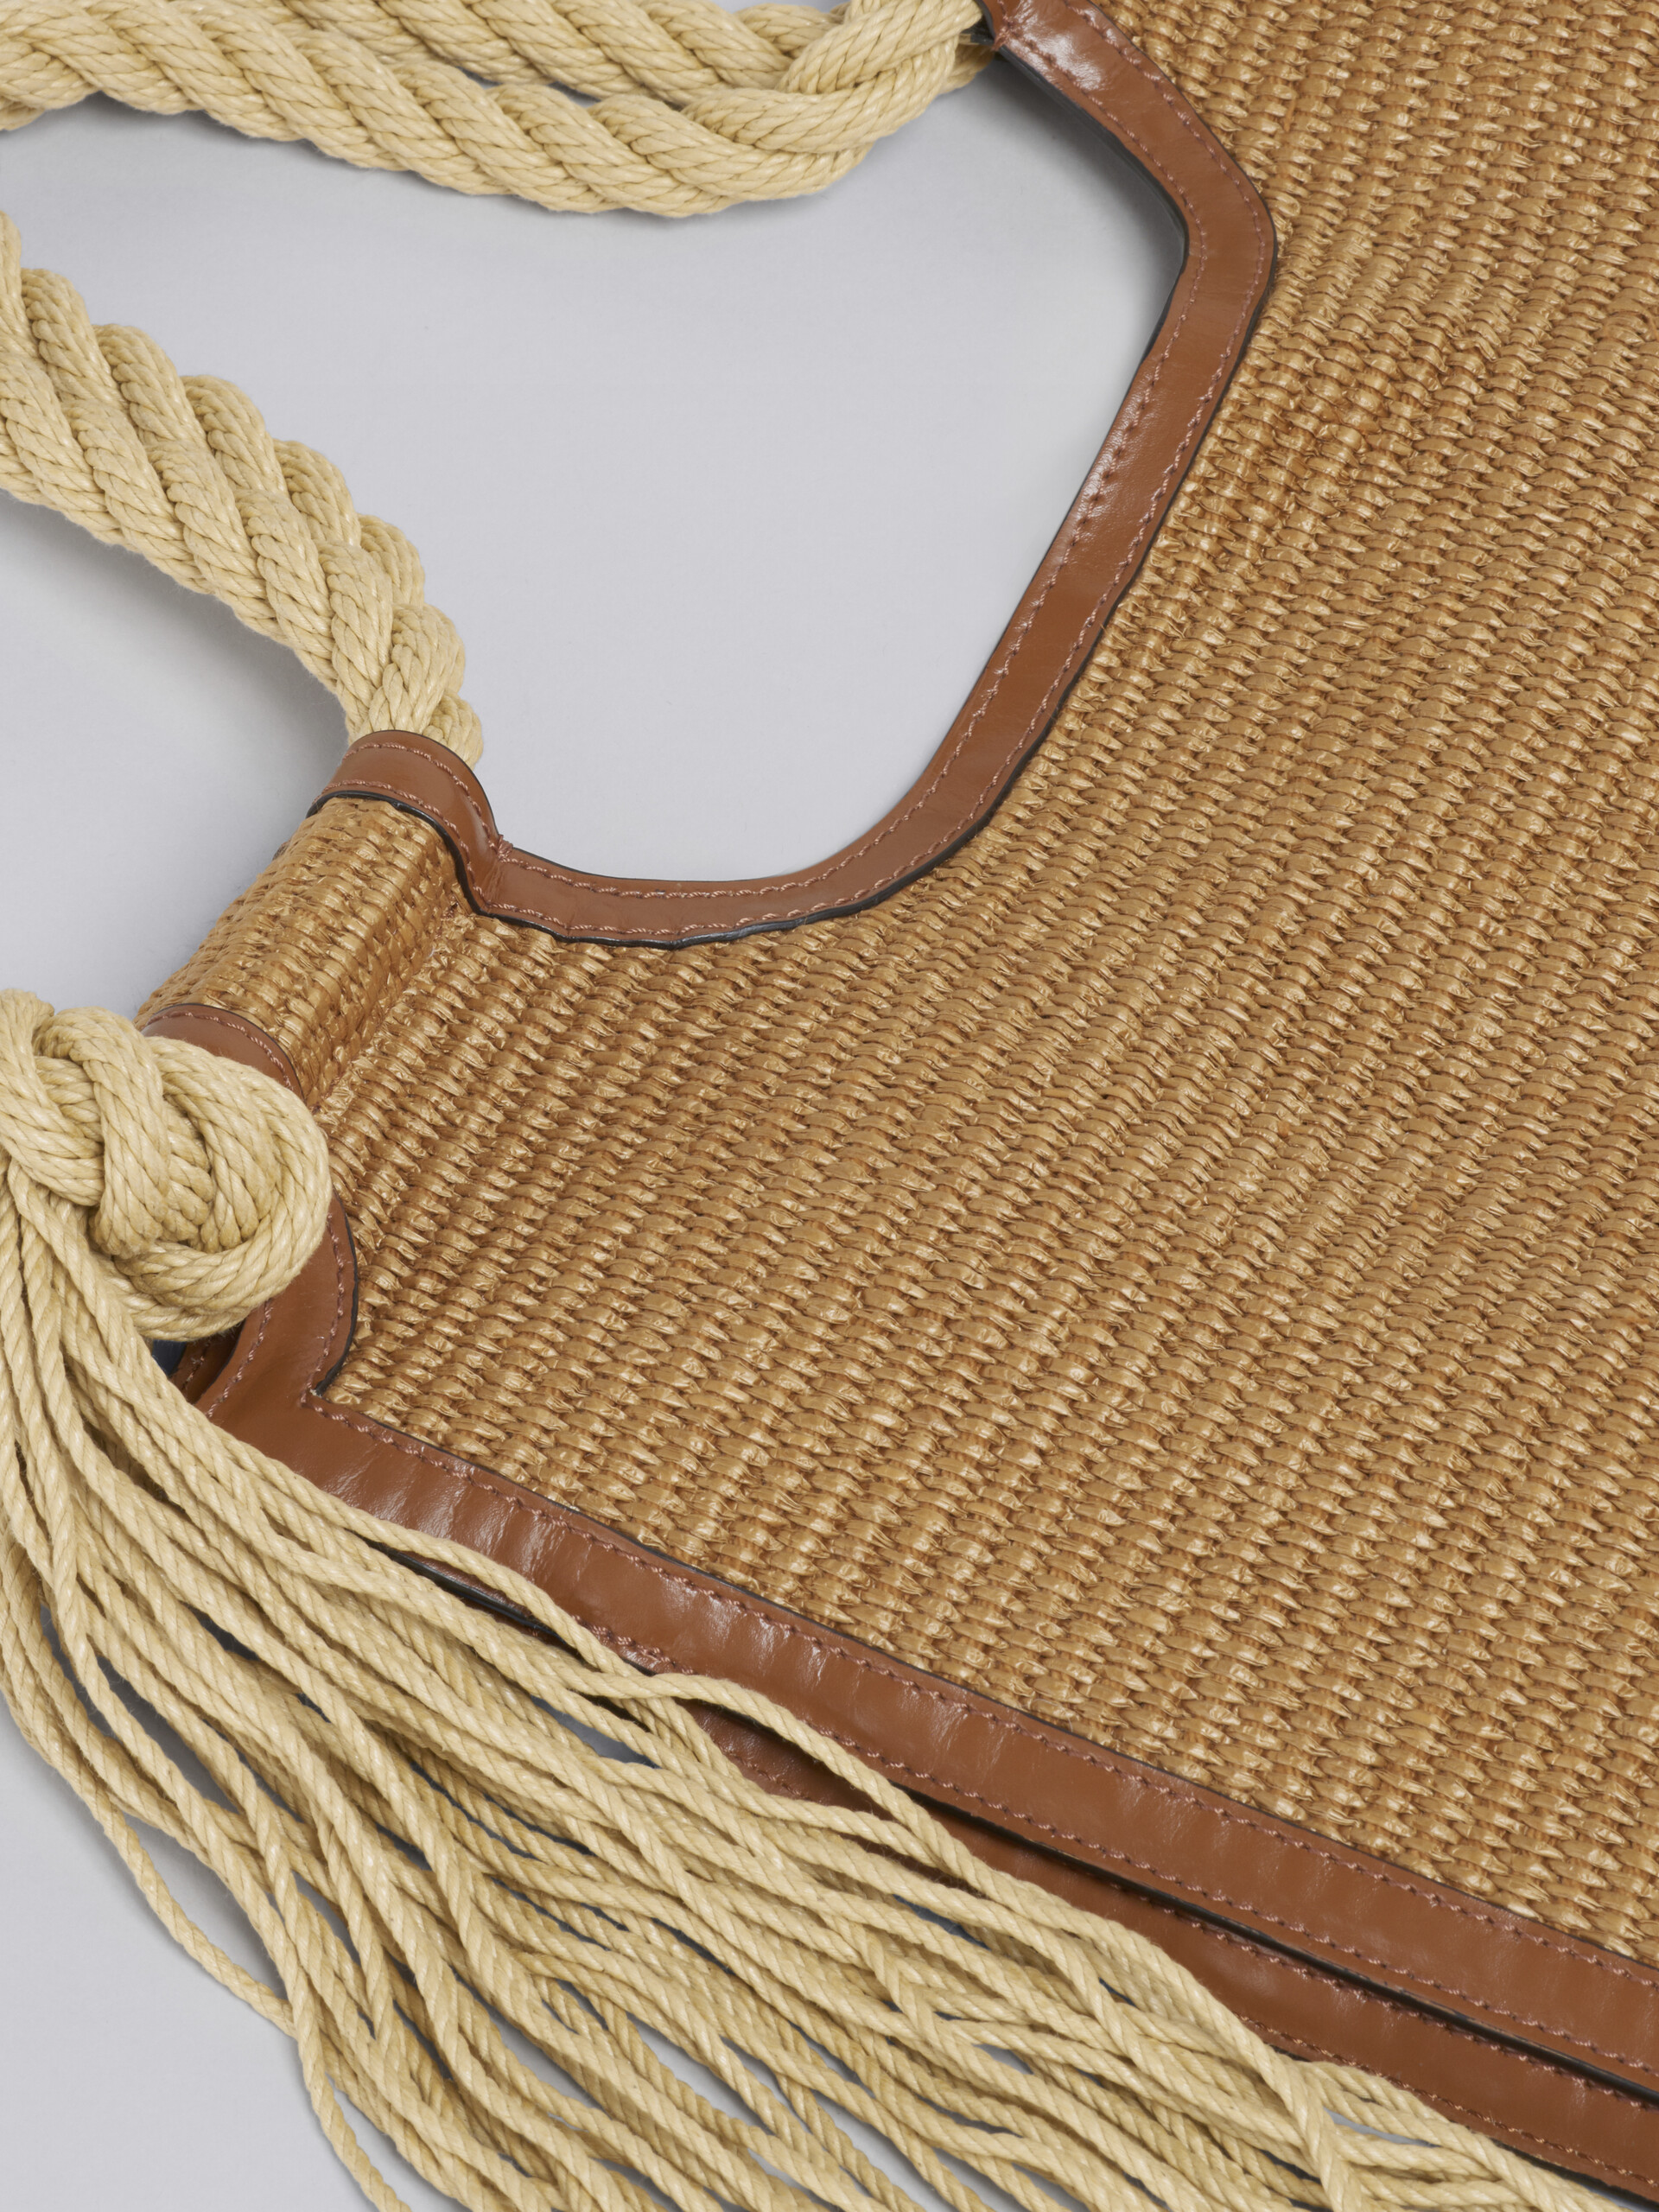 Marcel summer bag in brown leather and raffia with rope handles - Handbags - Image 5